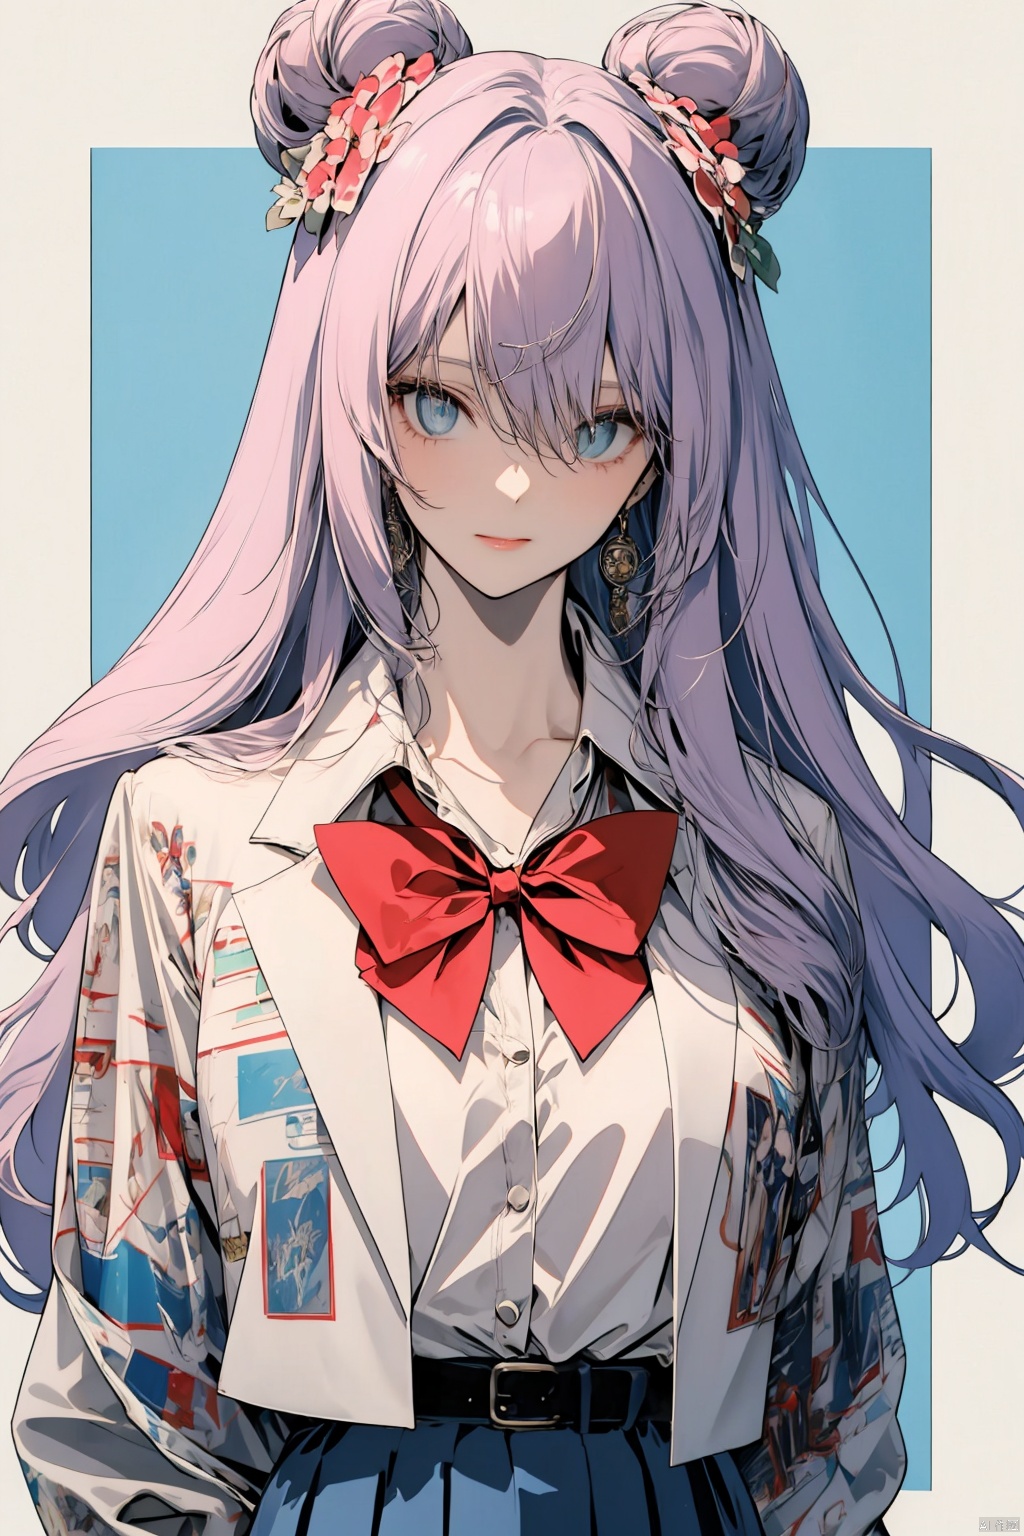 Long hair, light blue hair, pink streaks of hair, space bun hairstyle, flower hairpin, blue eyes, long-sleeve, button-up white shirt, a gray jacket with blue-green stripes, a red bow, dark blue-green pleated skirt, school background, add_detail:1, add_detail:0, add_detail:0.5